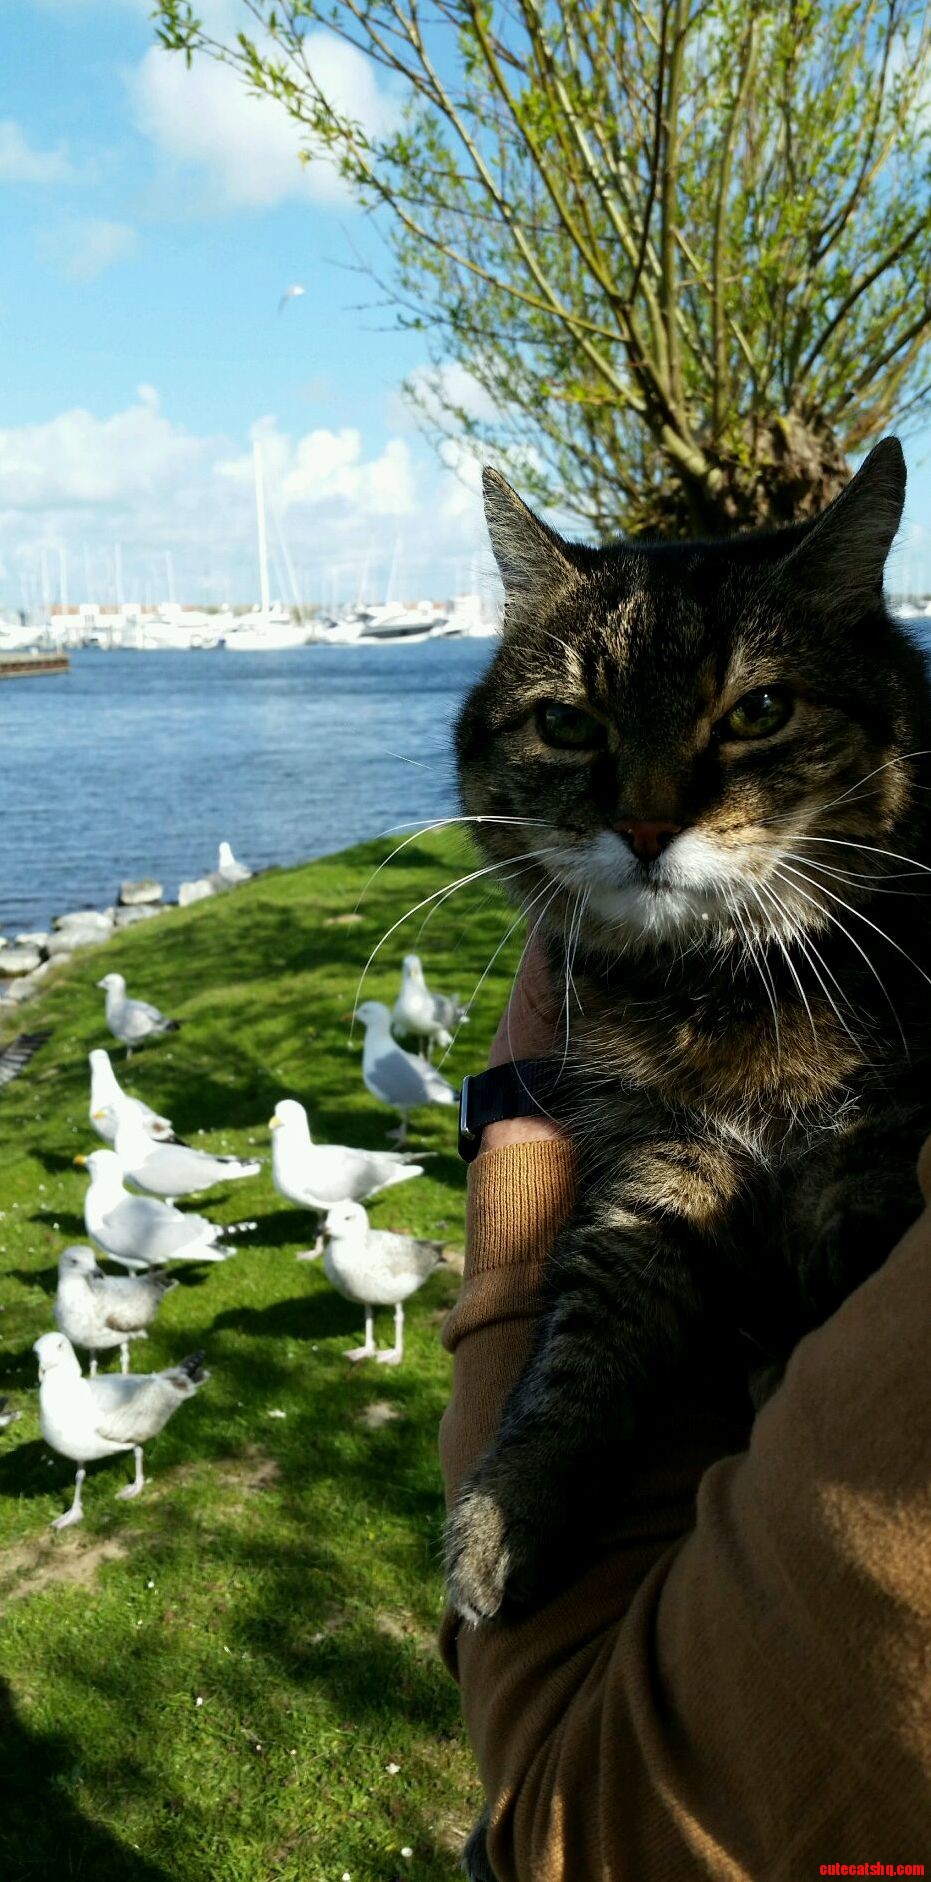 Tiger couldnt care less about seagulls